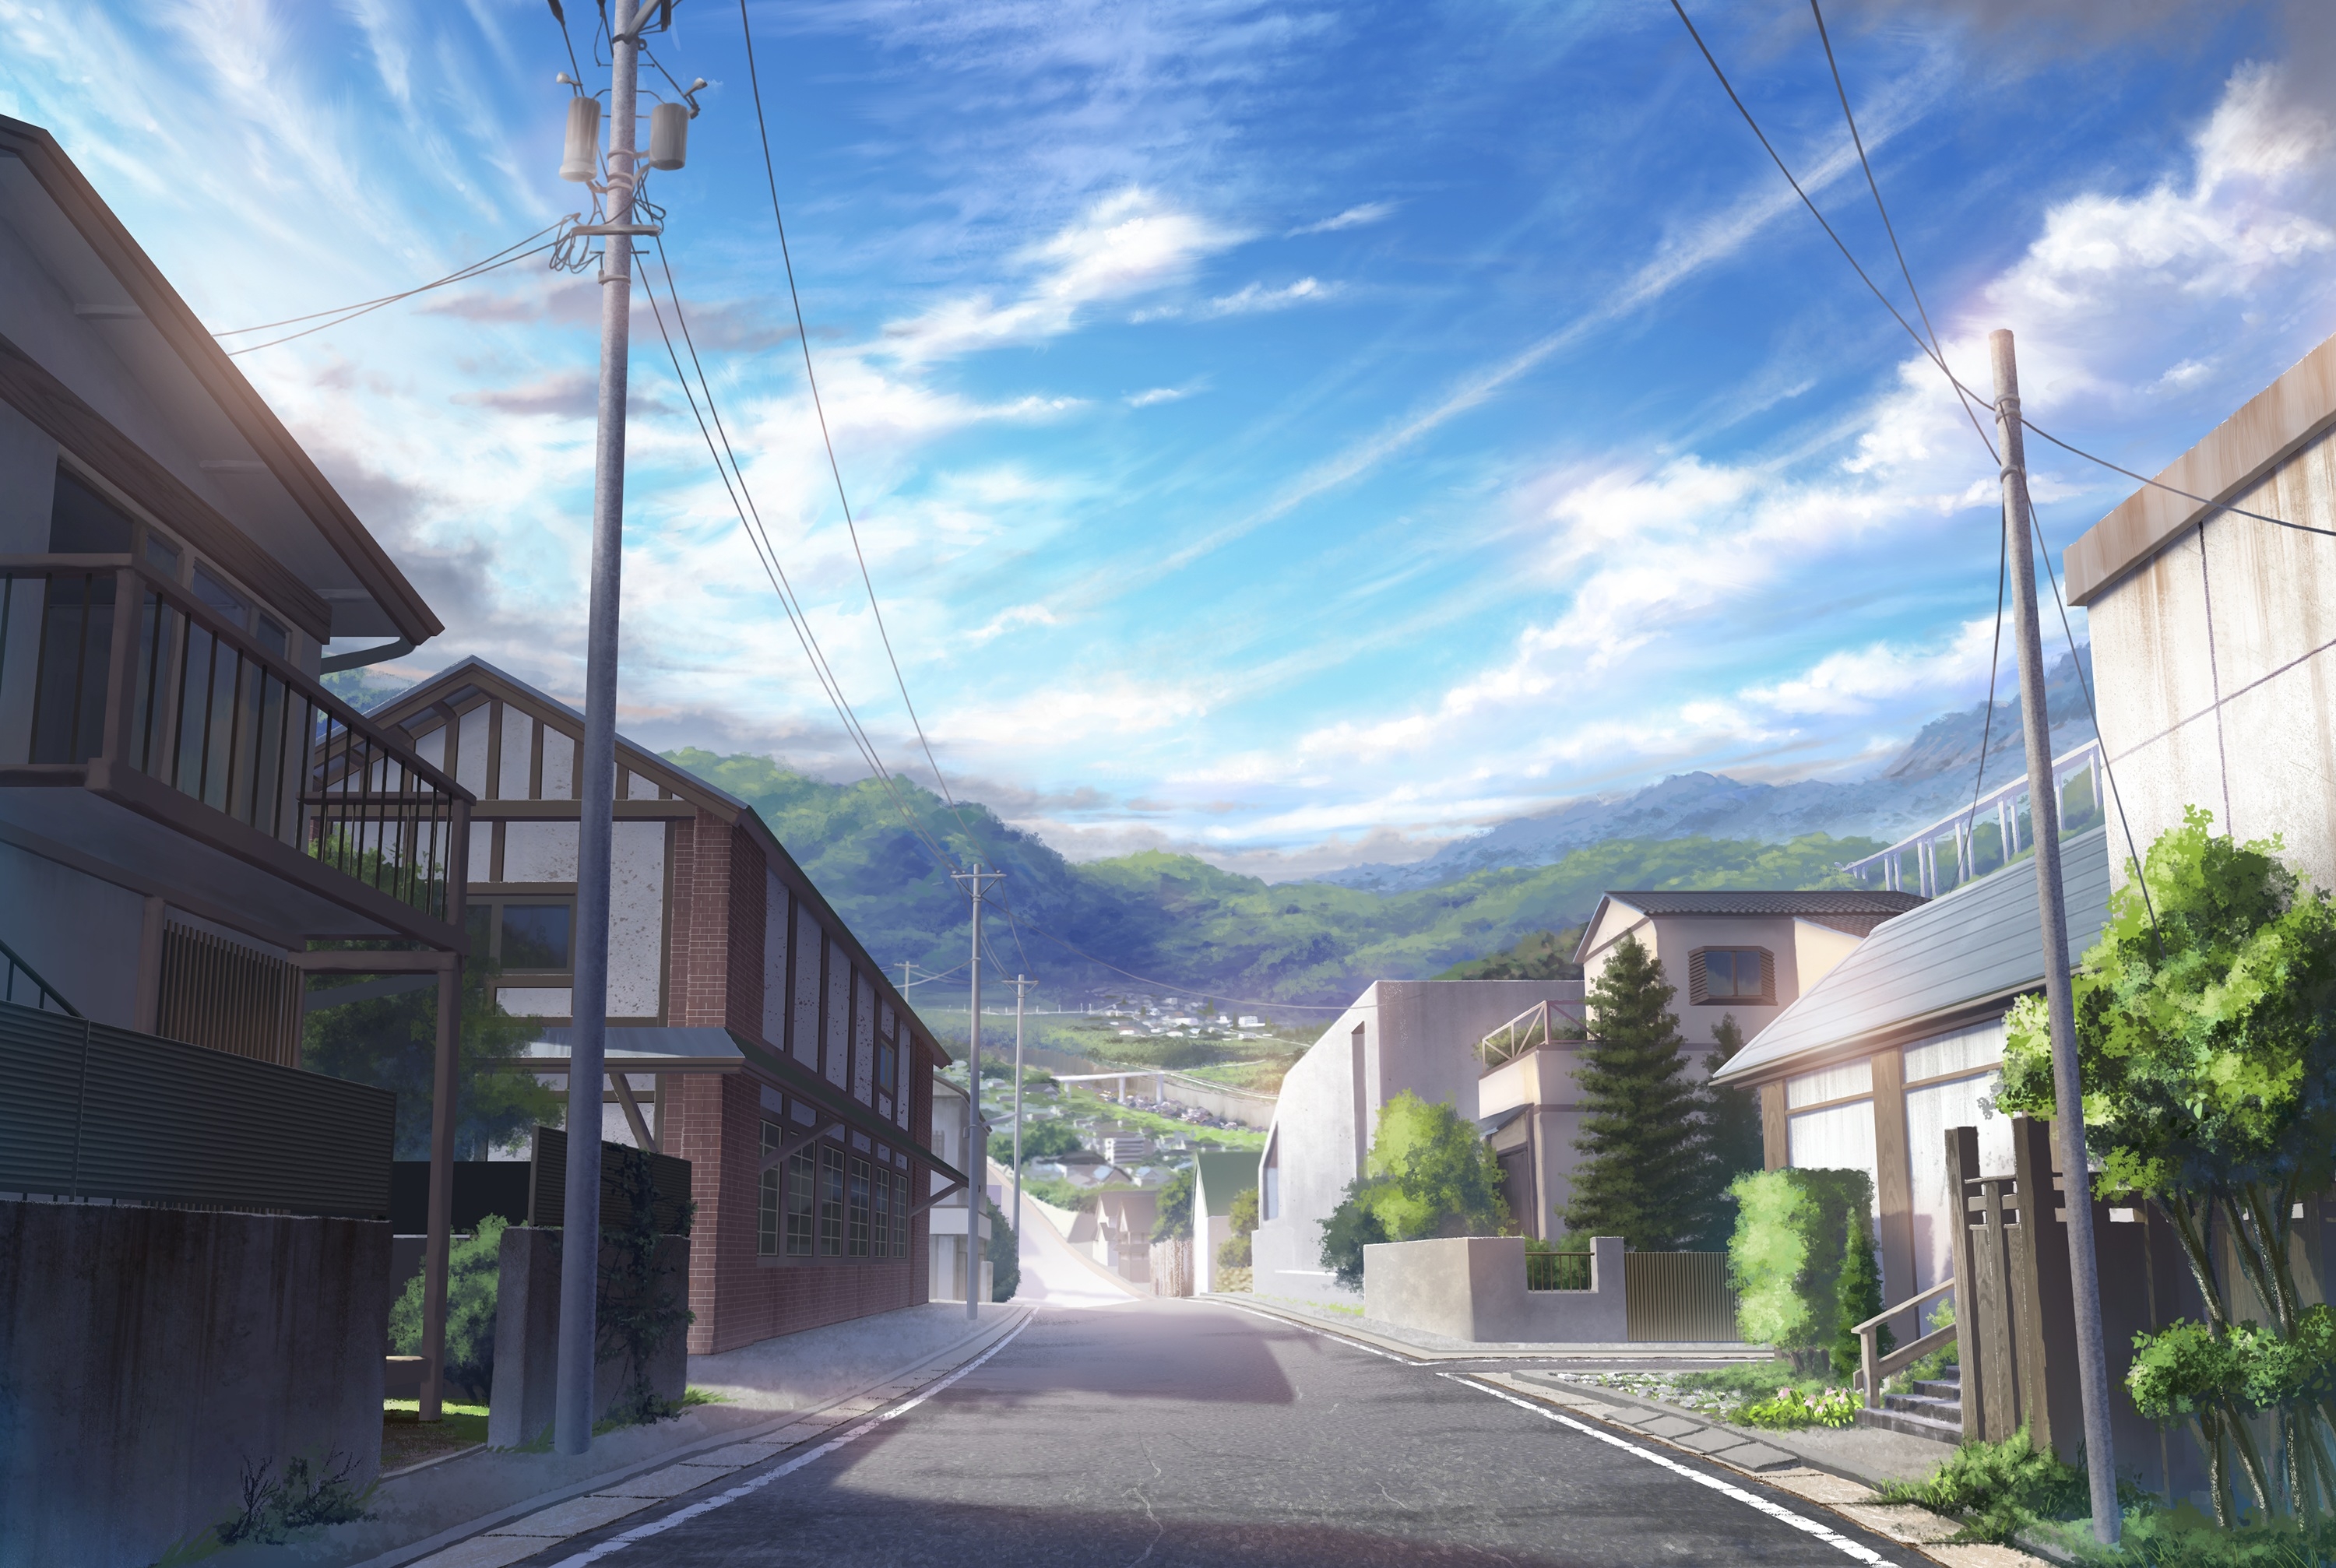 Download x anime street clouds scenic buildings enviroment sky wallpapers for widescreen